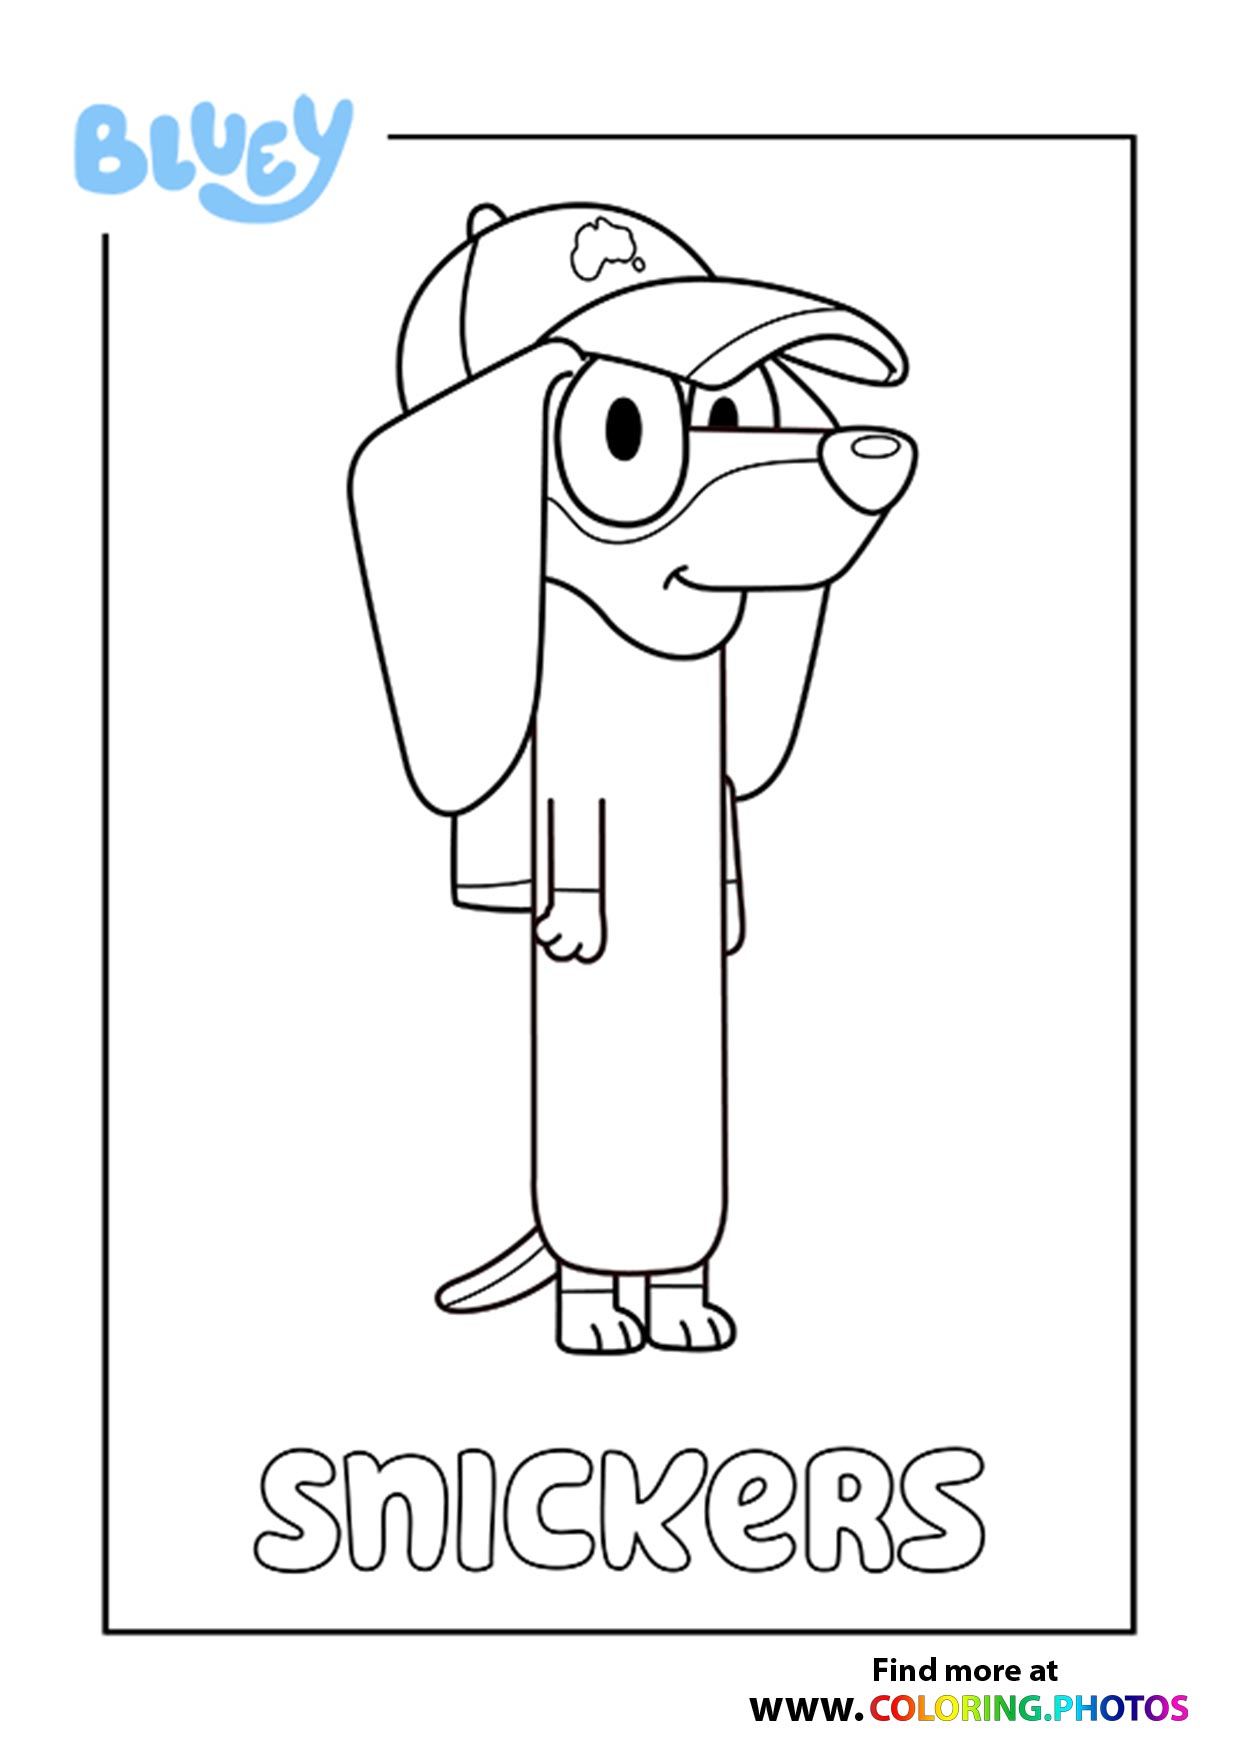 bluey-coloring-pages-for-kids-free-and-easy-print-or-download